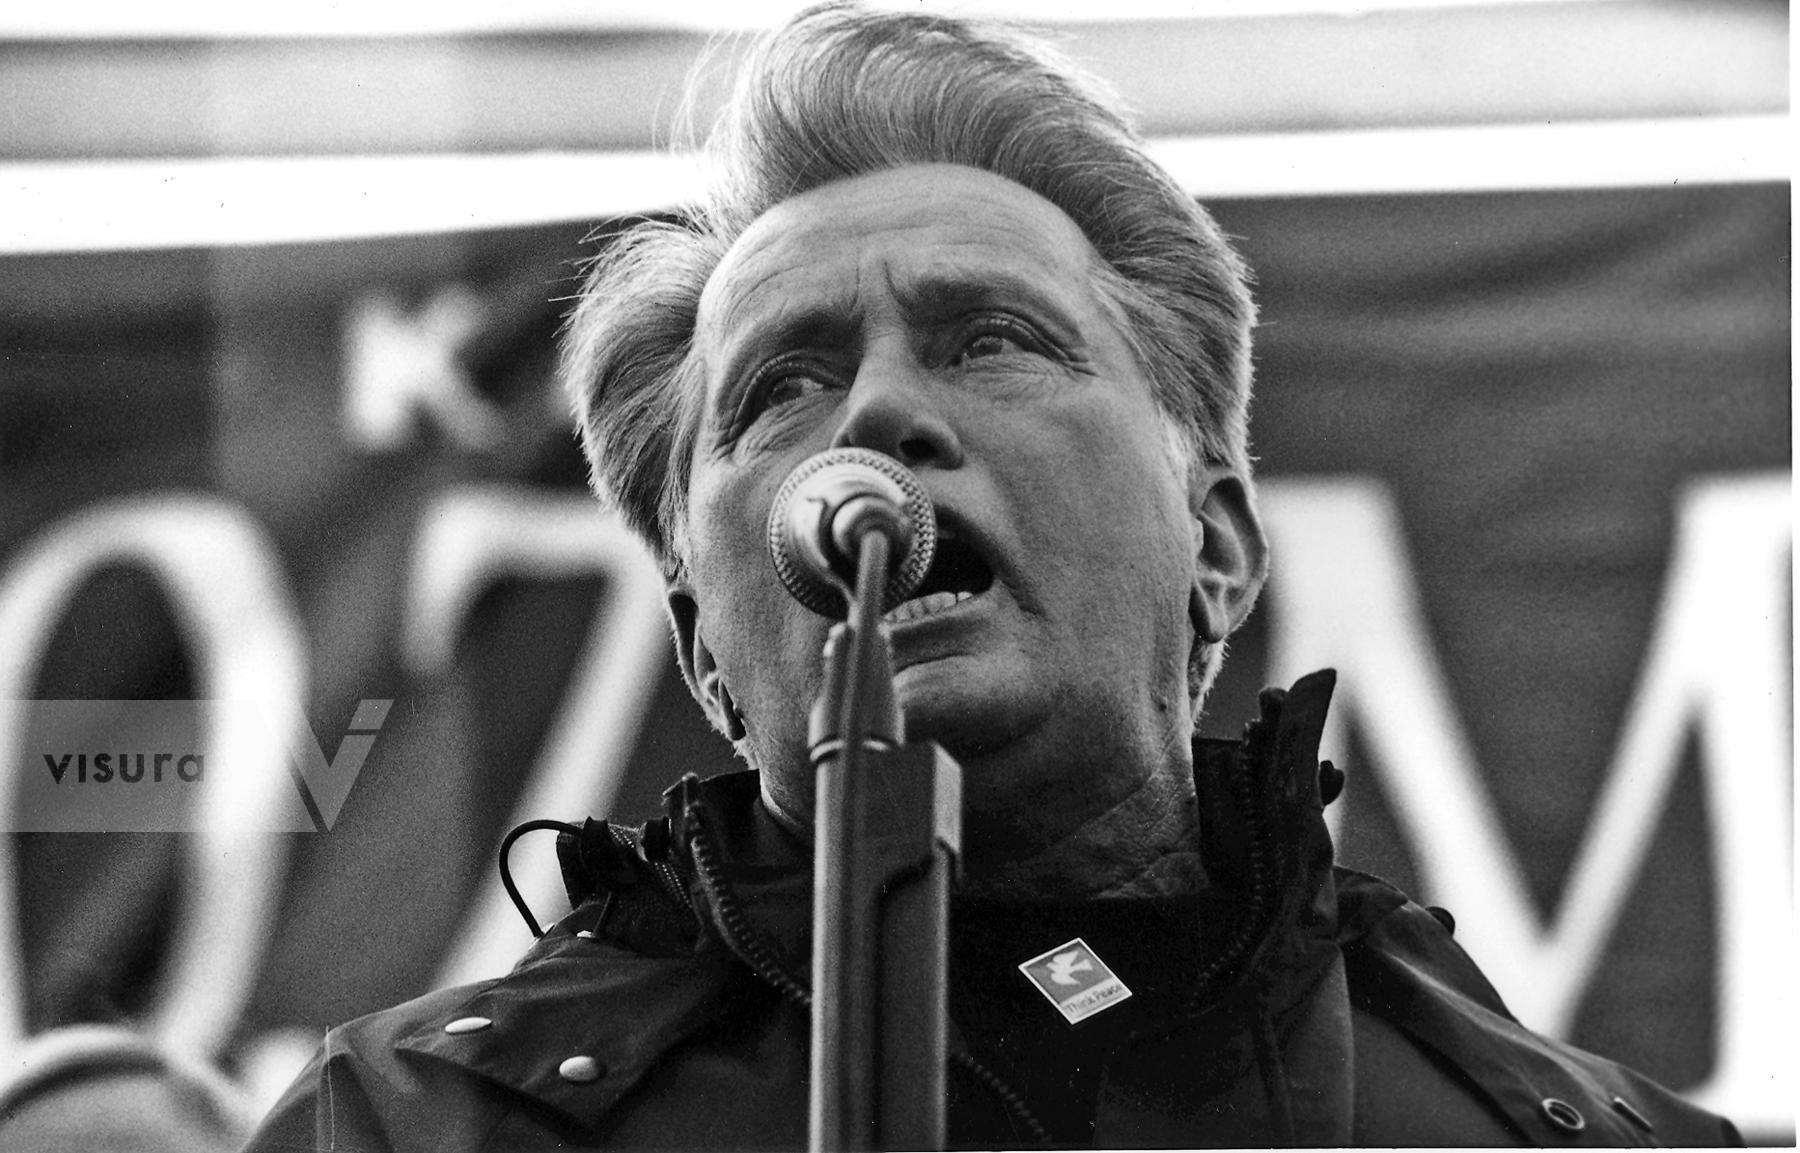 Purchase Martin Sheen - The Activists Activist by Tish Lampert